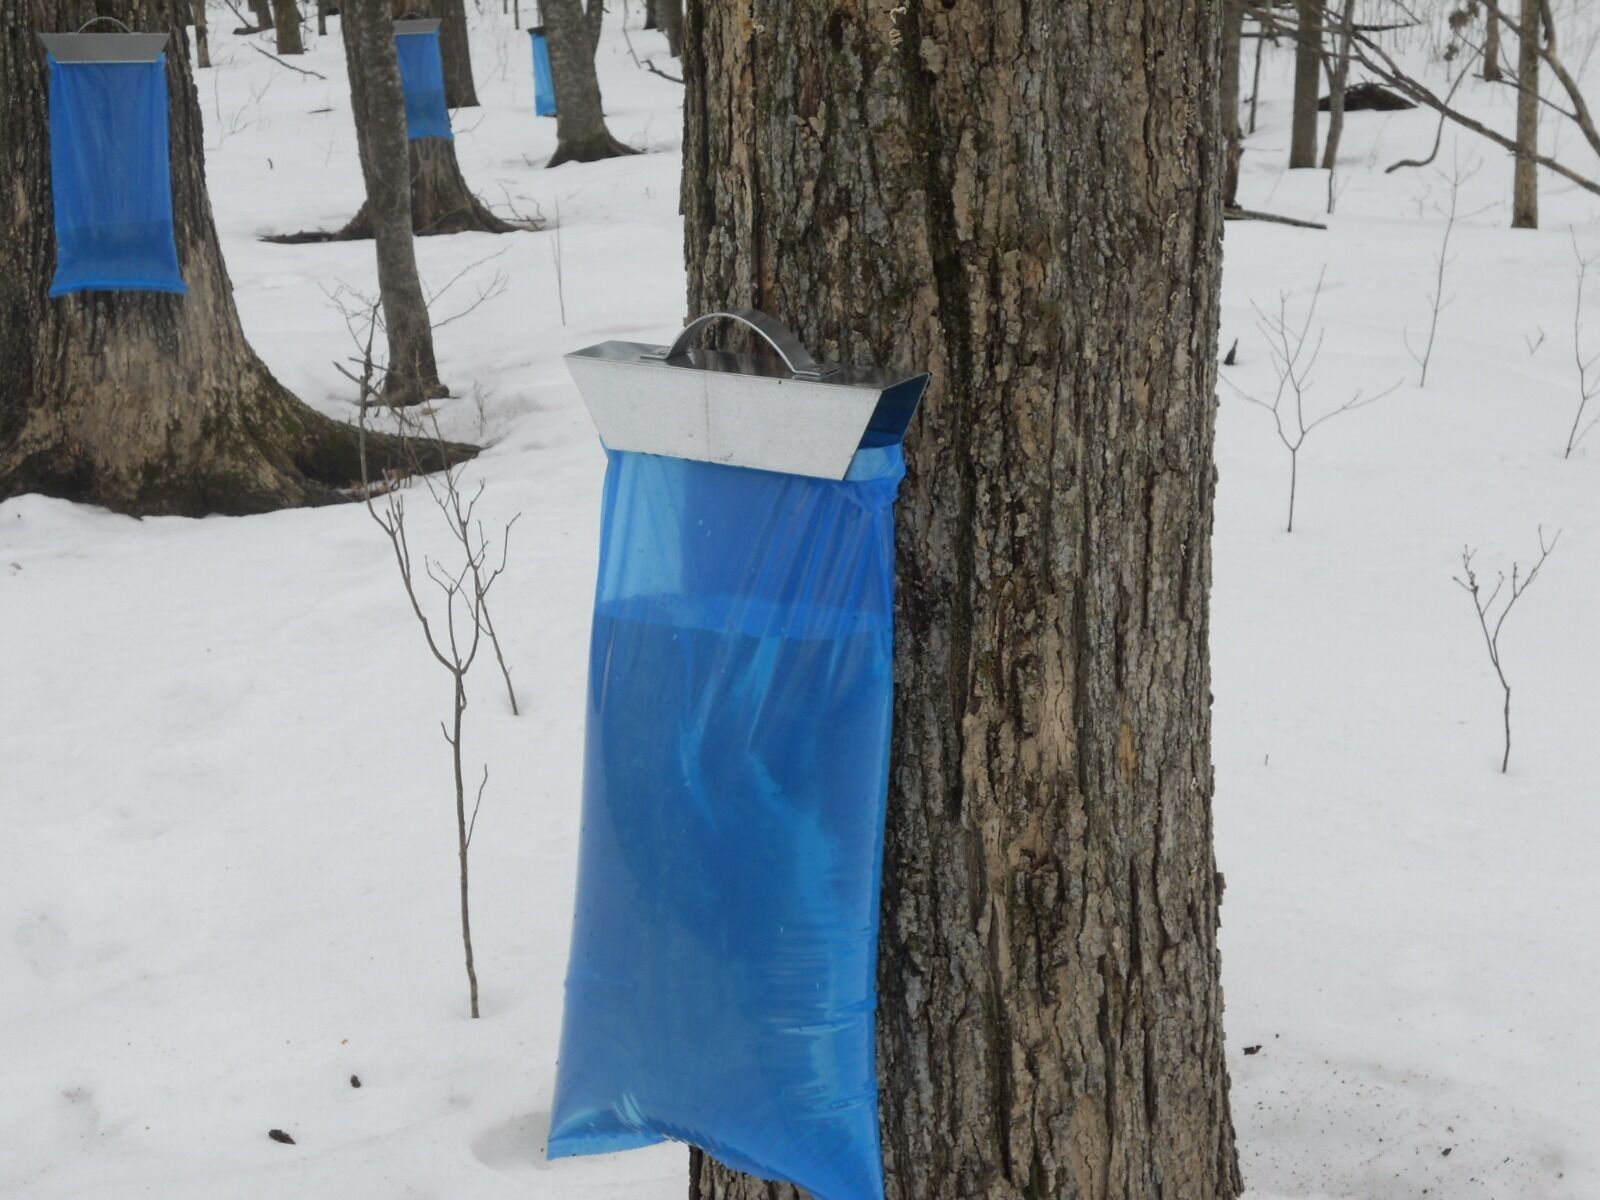 25 Maple Sap / Syrup Bags For Sap Sack Holders